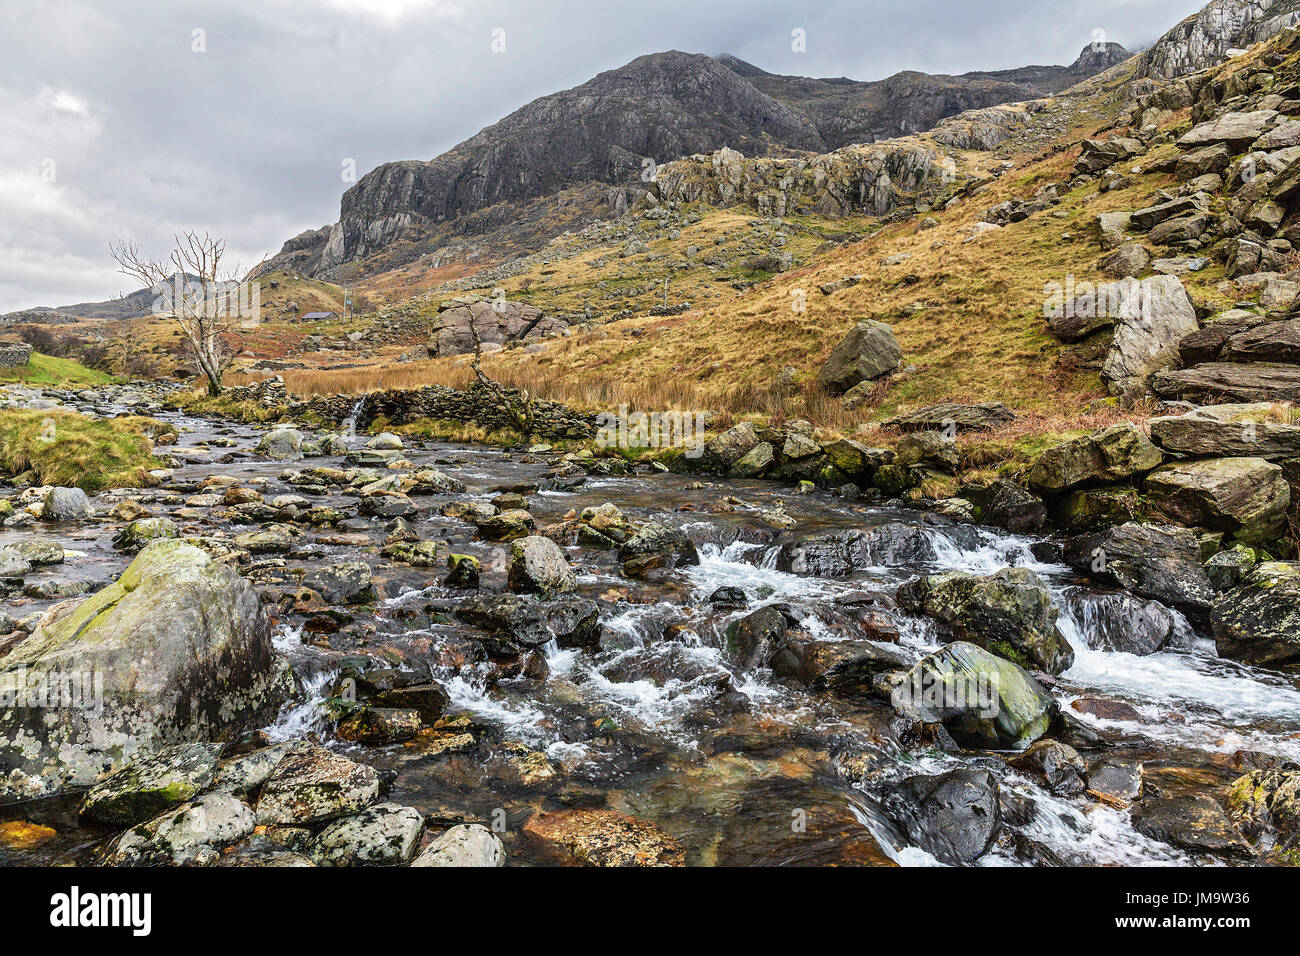 Afon (River) Nant Peris in the Llanberis Pass looking south east Snowdonia North Wales UK February 57437 Stock Photo